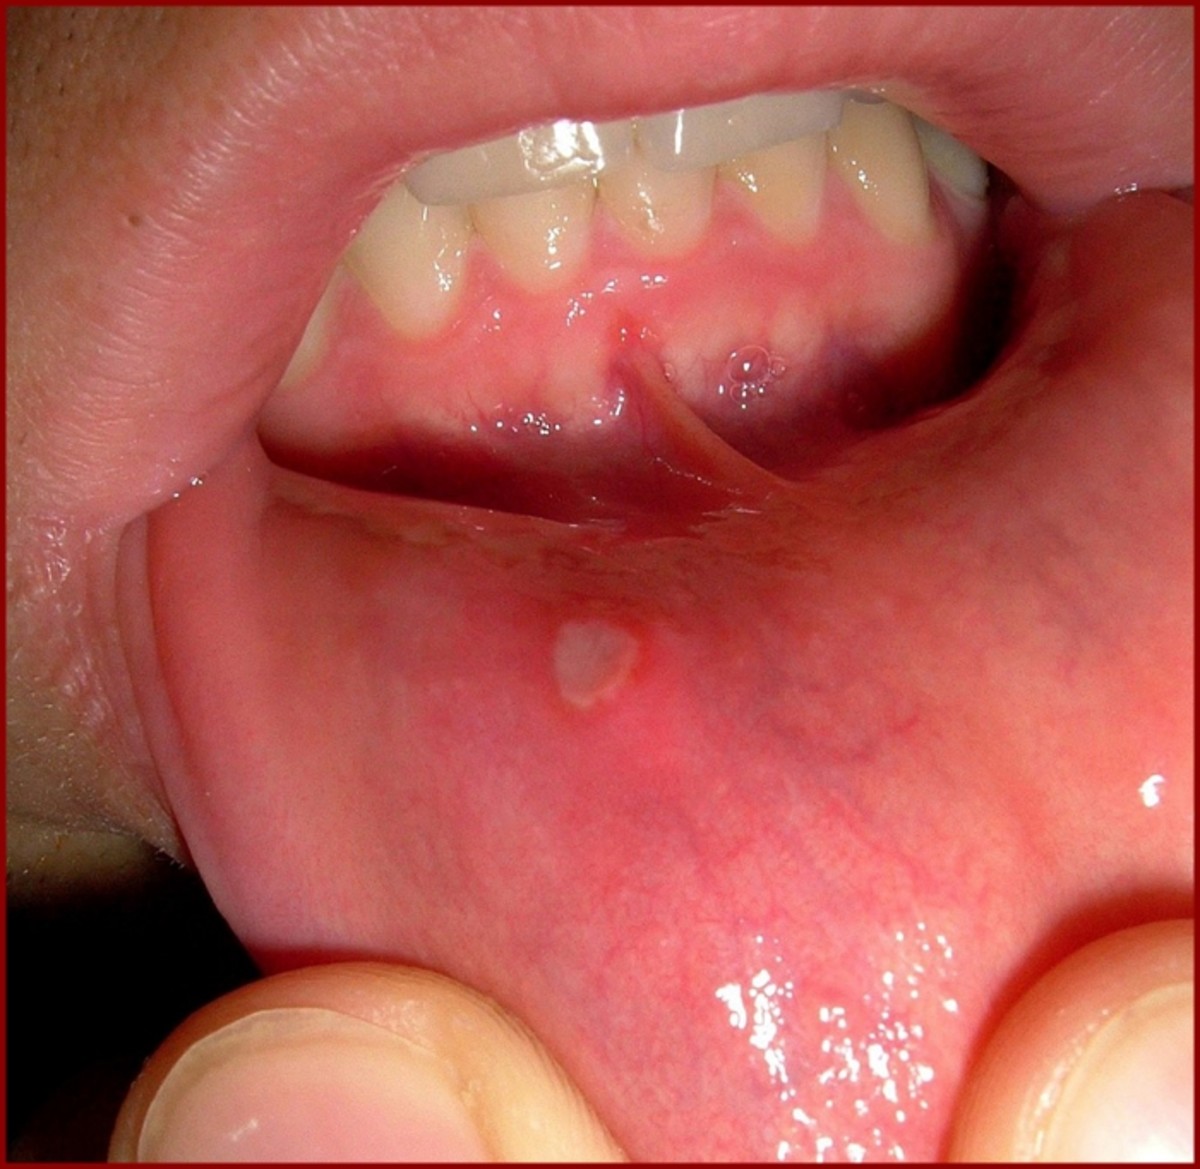 Mouth ulcer inside the lip